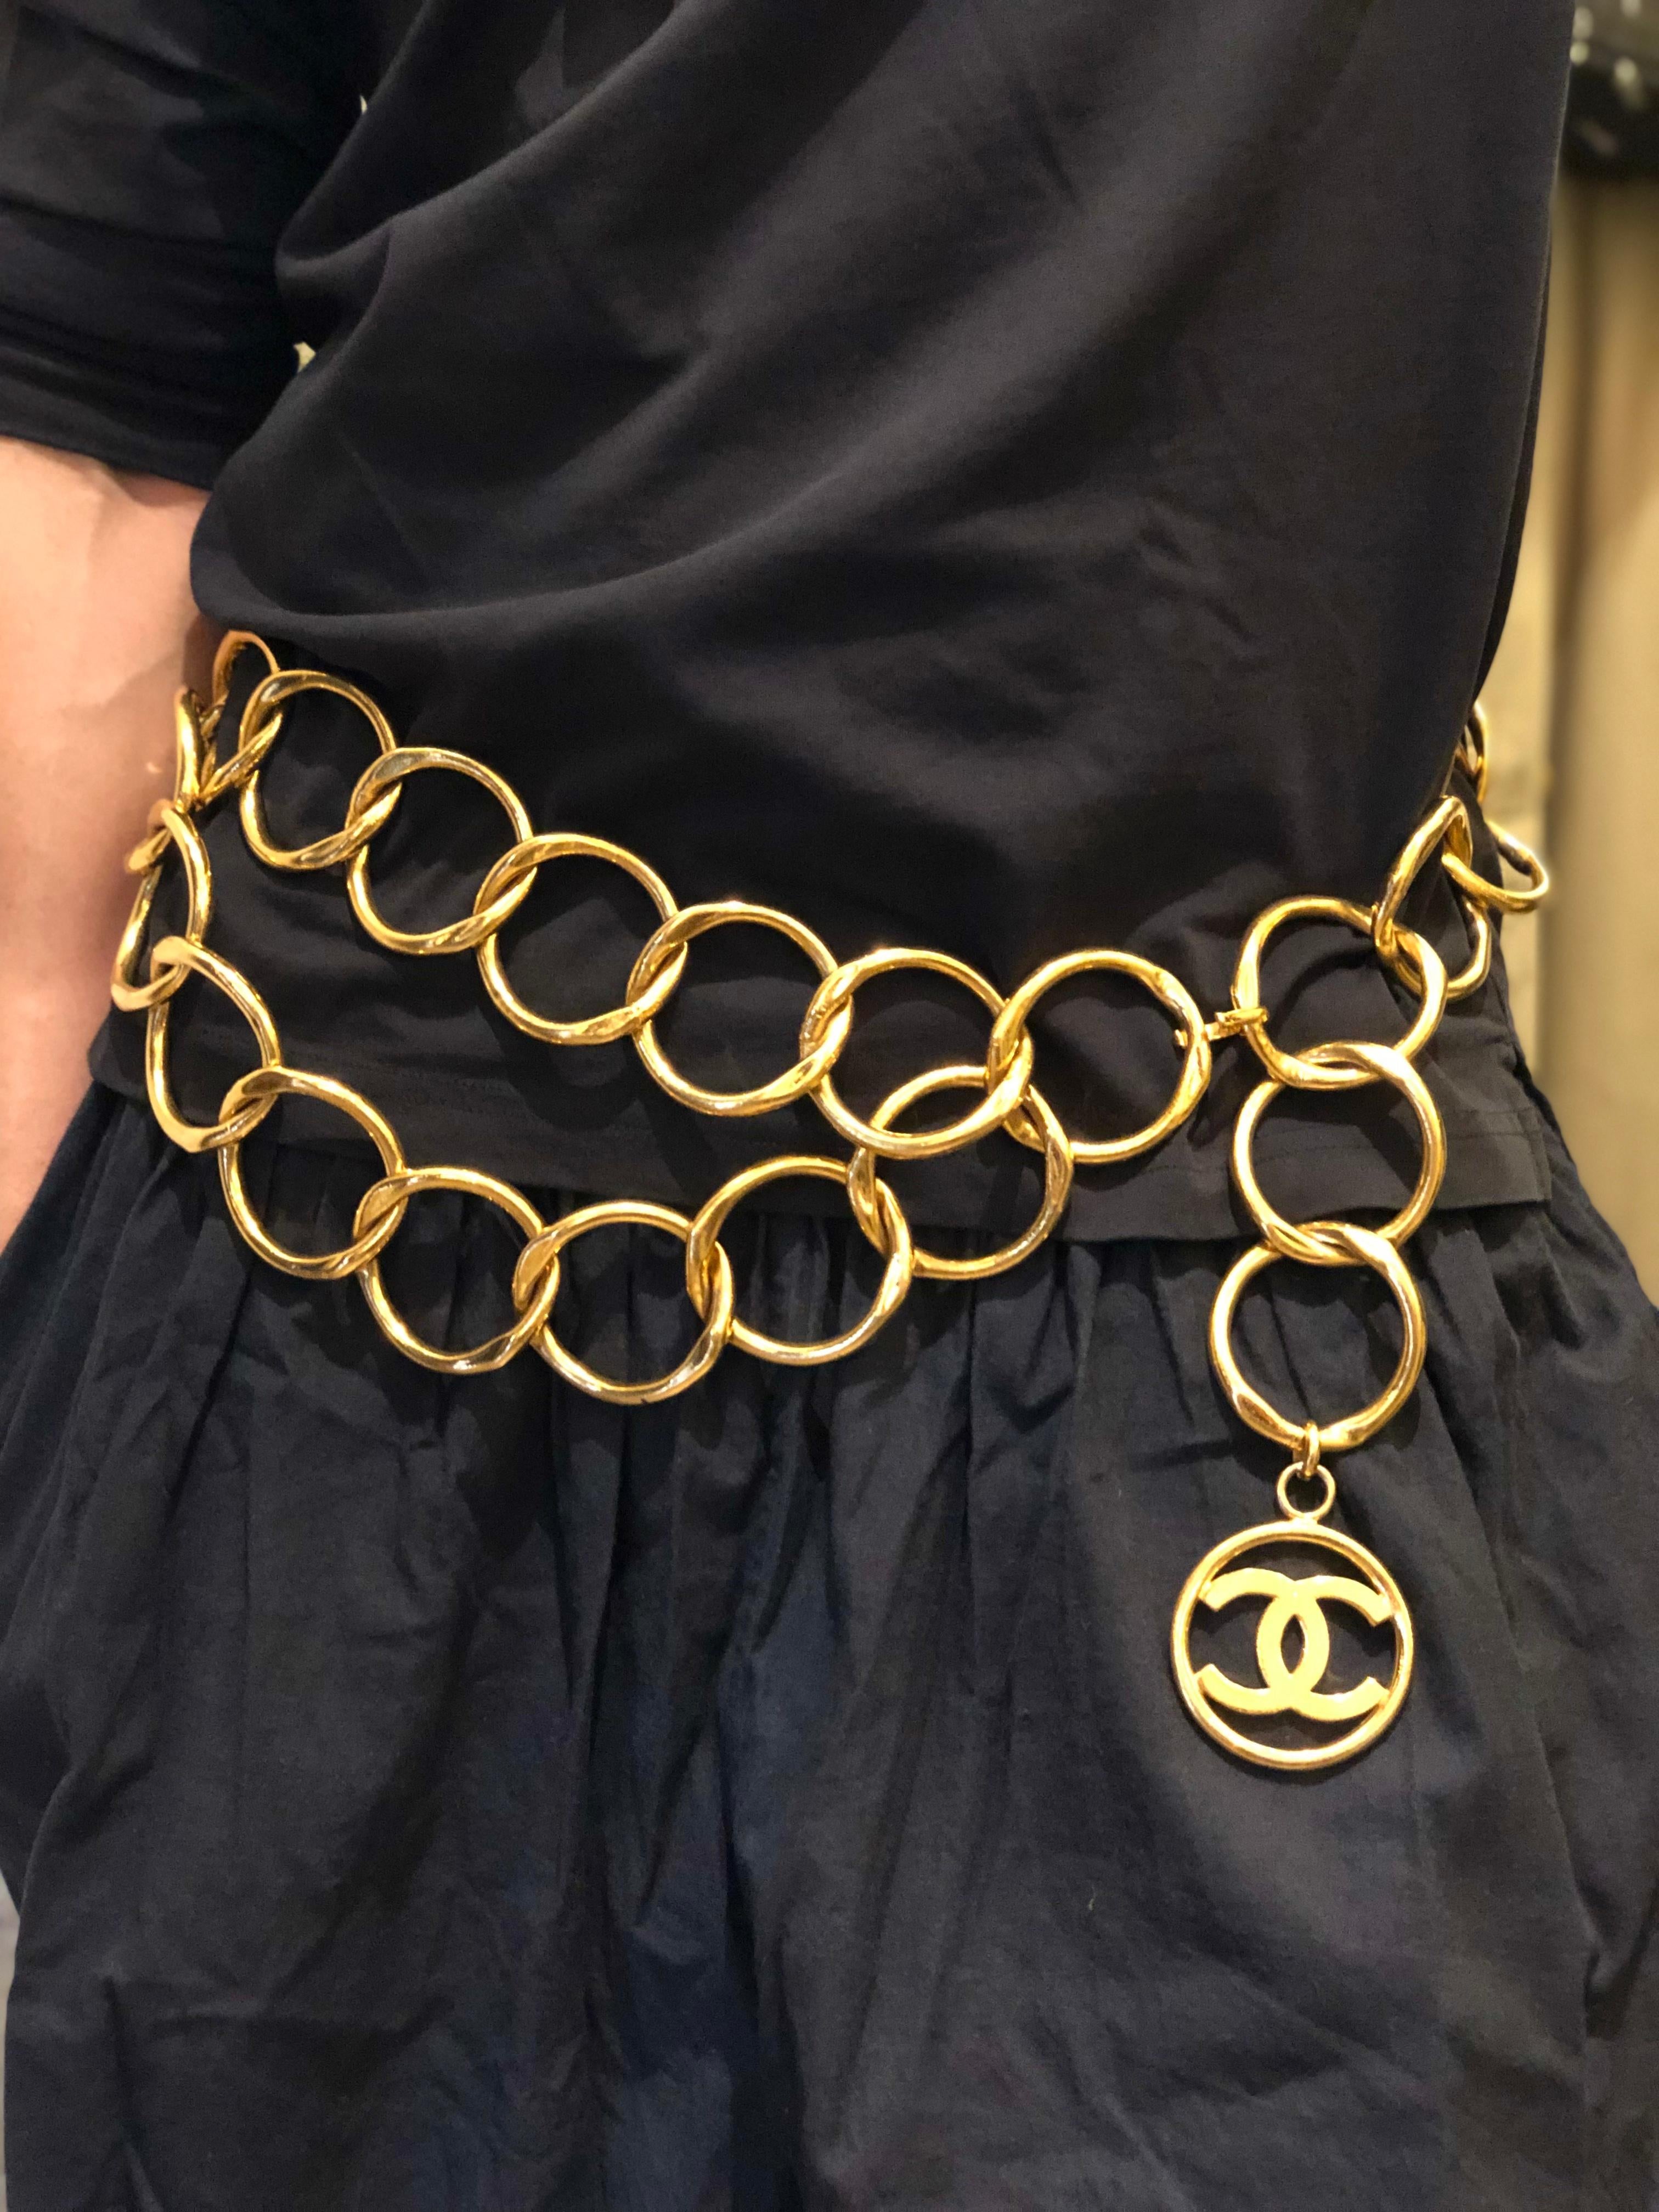 This vintage statement CHANEL massive chain belt is crafted of giant gold toned chain featuring a giant CC charm. Stamped CHANEL 2 5 made in France. Adjustable hook fastening. This massive chain belt was showcased on runway of 1991 Spring/Summer